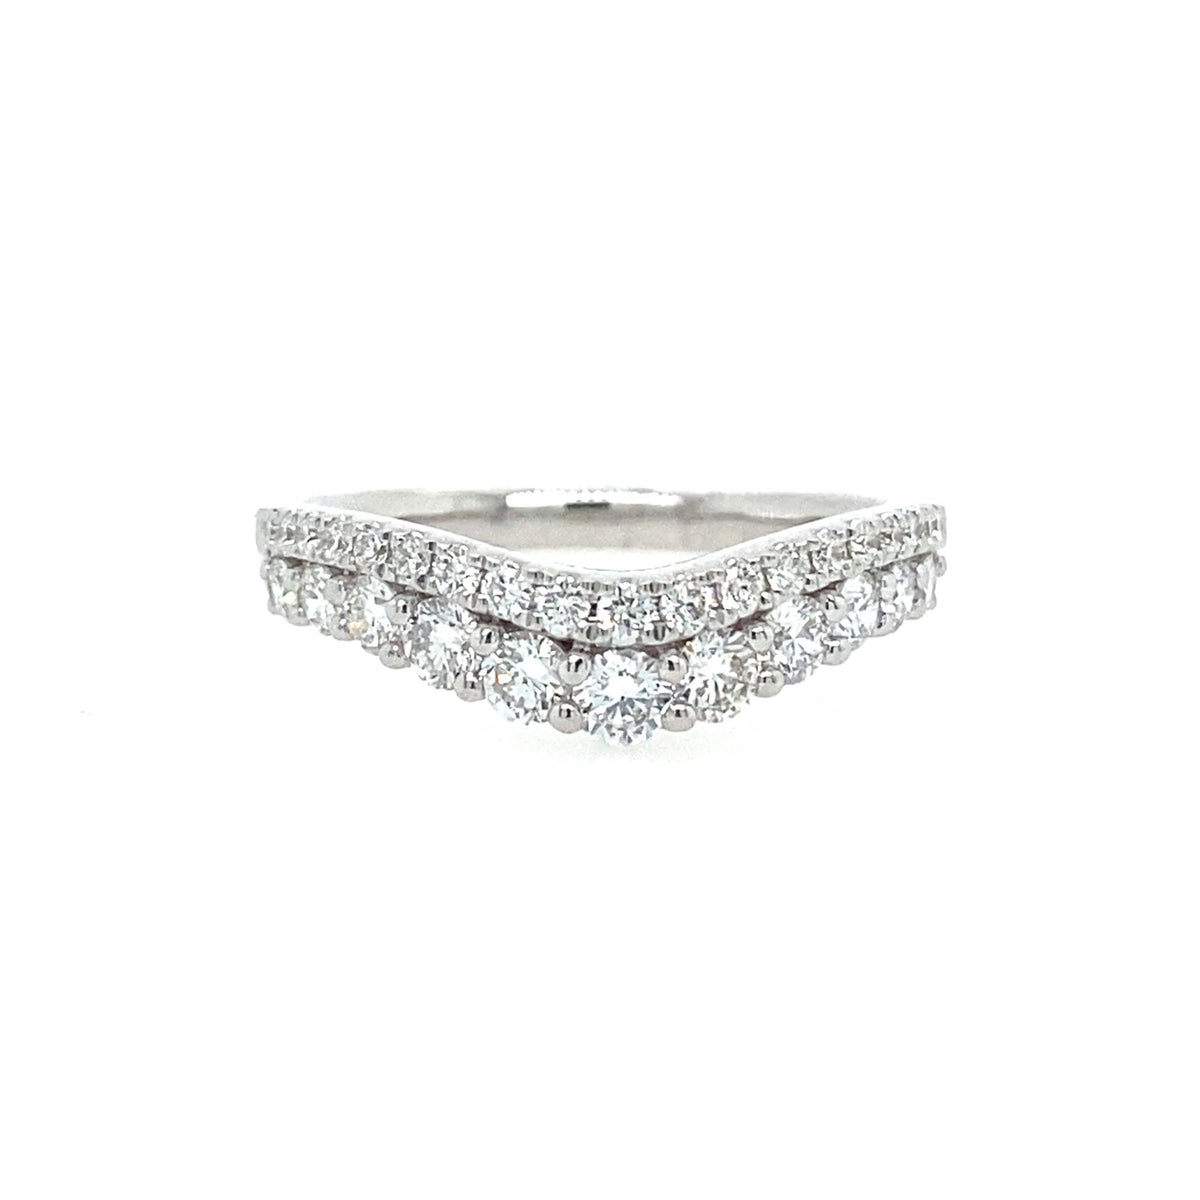 14Kt White Gold Curved Wedding Ring With 0.78cttw Natural Diamonds